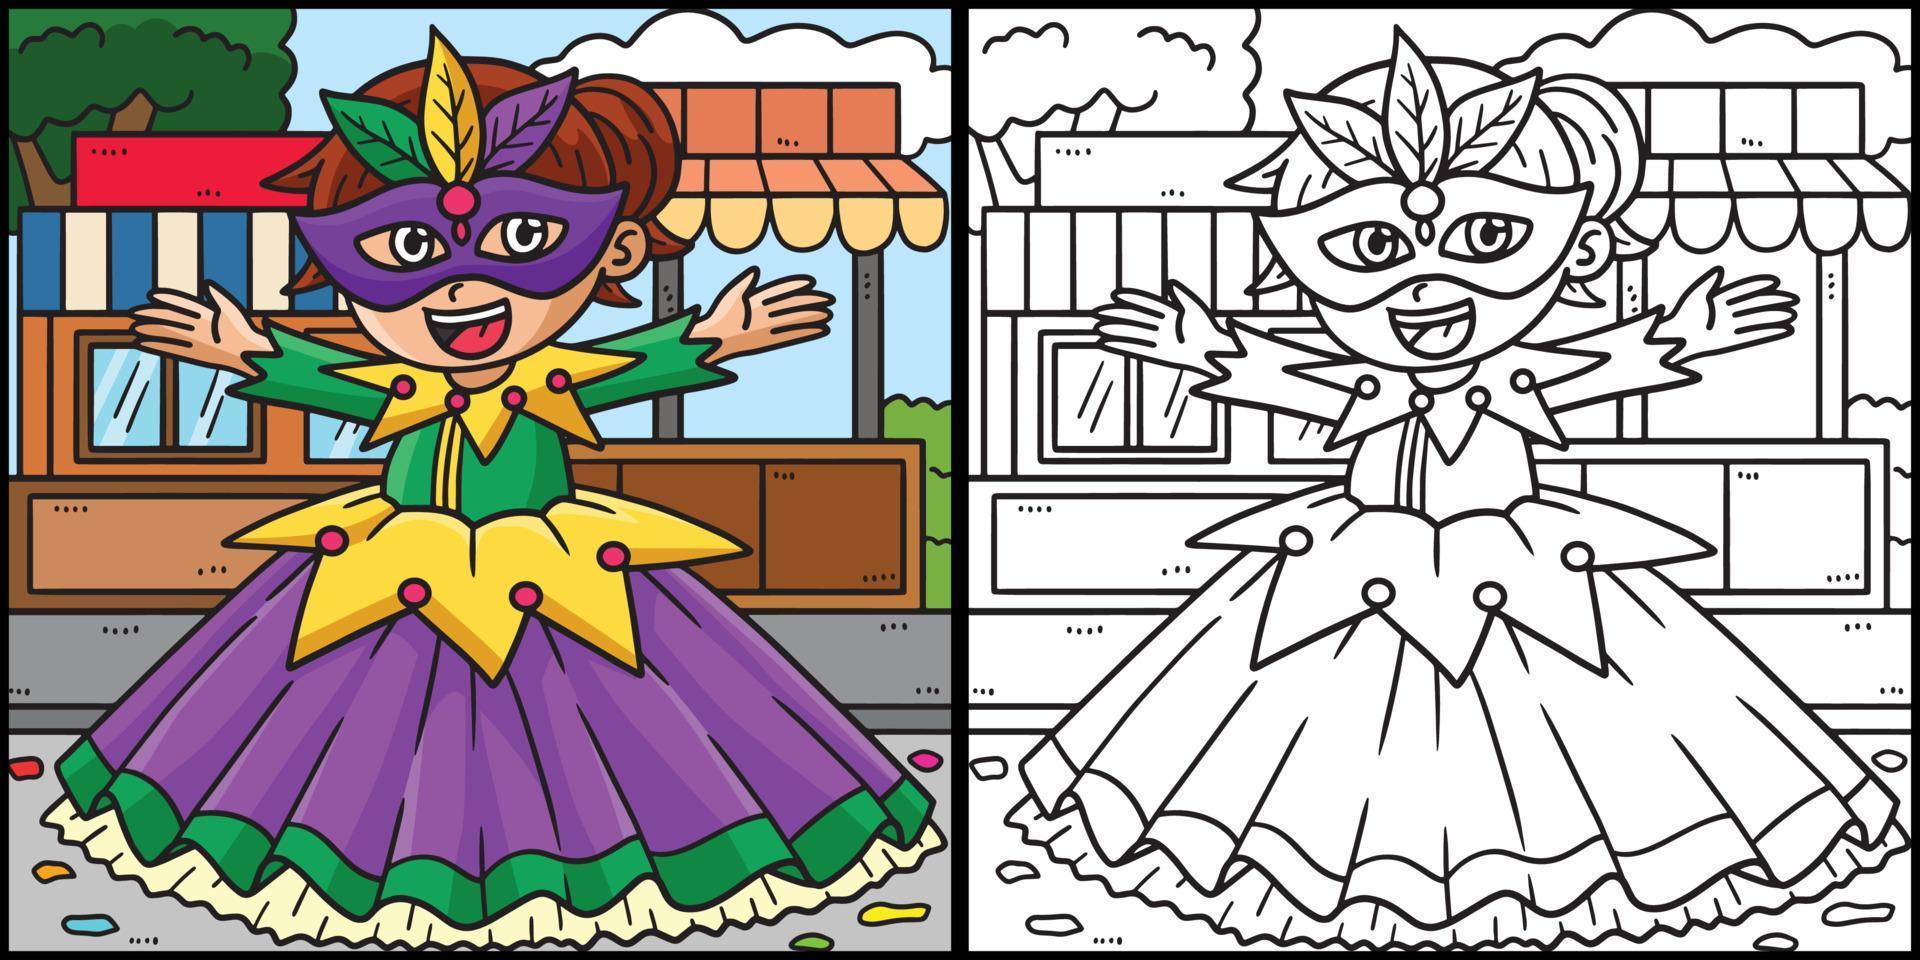 Mardi Gras Jester Girl Coloring Page Illustration vector